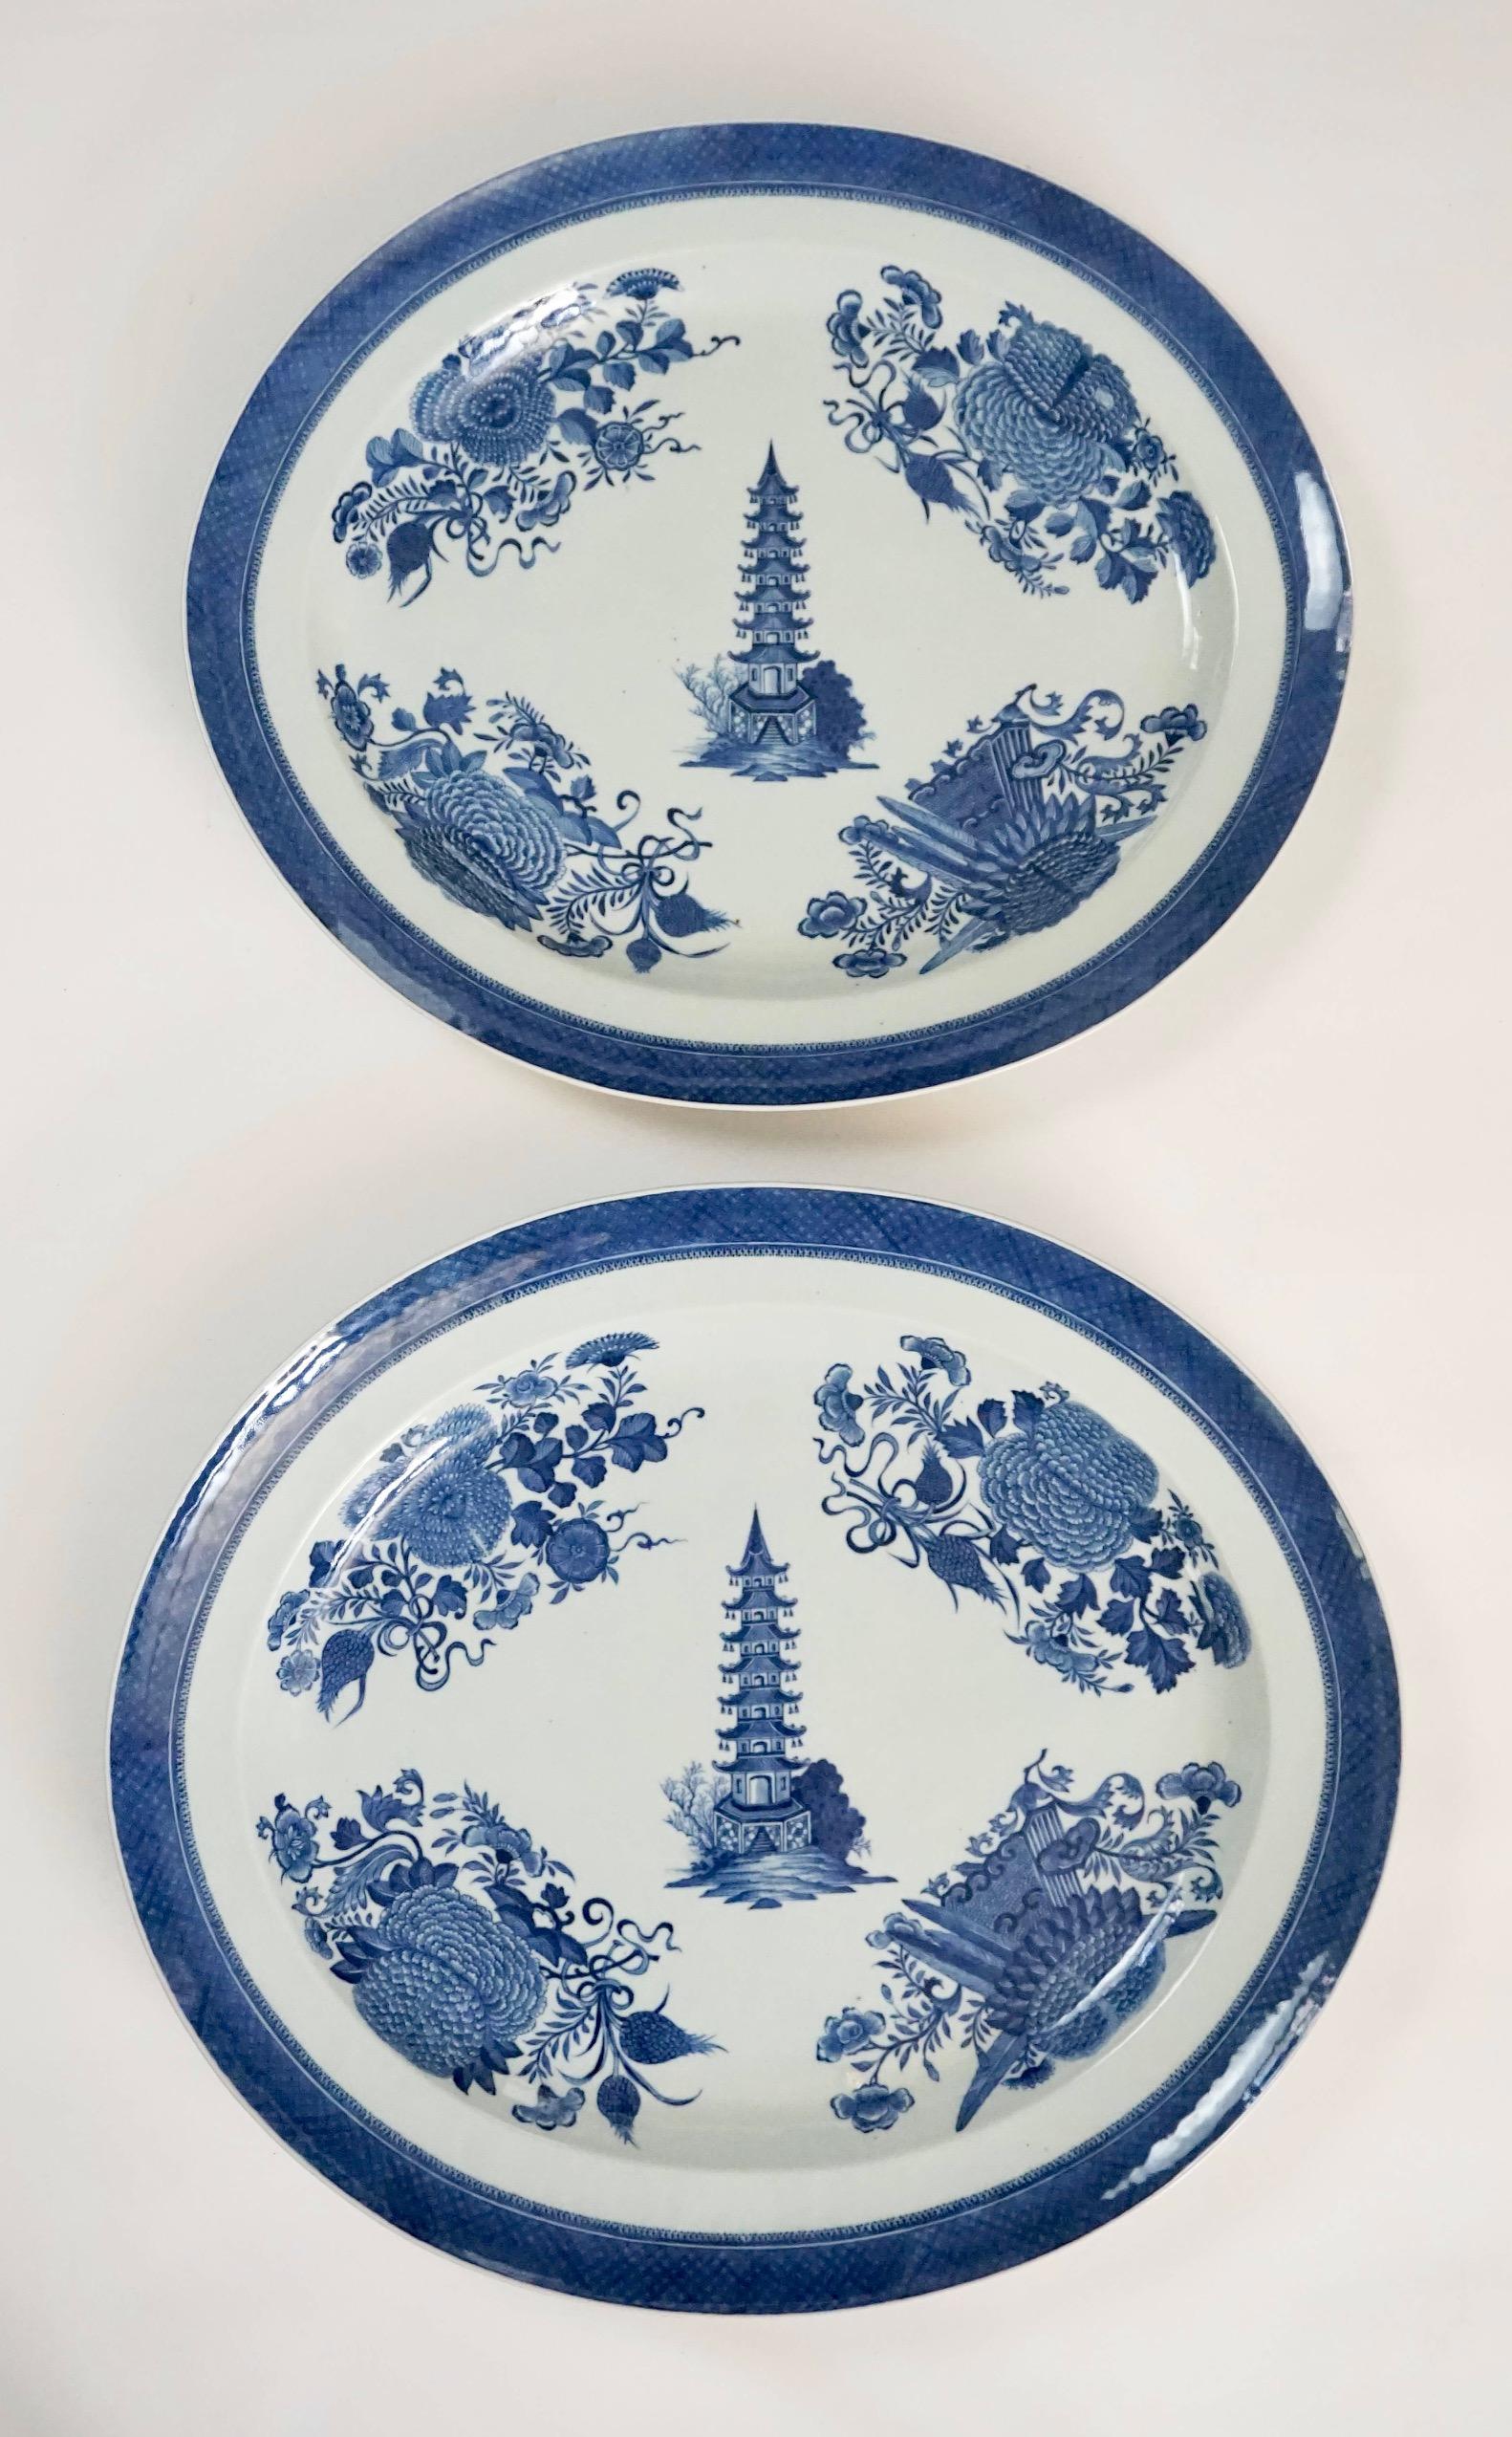 Chinese Export 'Blue Fitzhugh' Platters from the Cabot-Perkins Service, c. 1812 For Sale 7